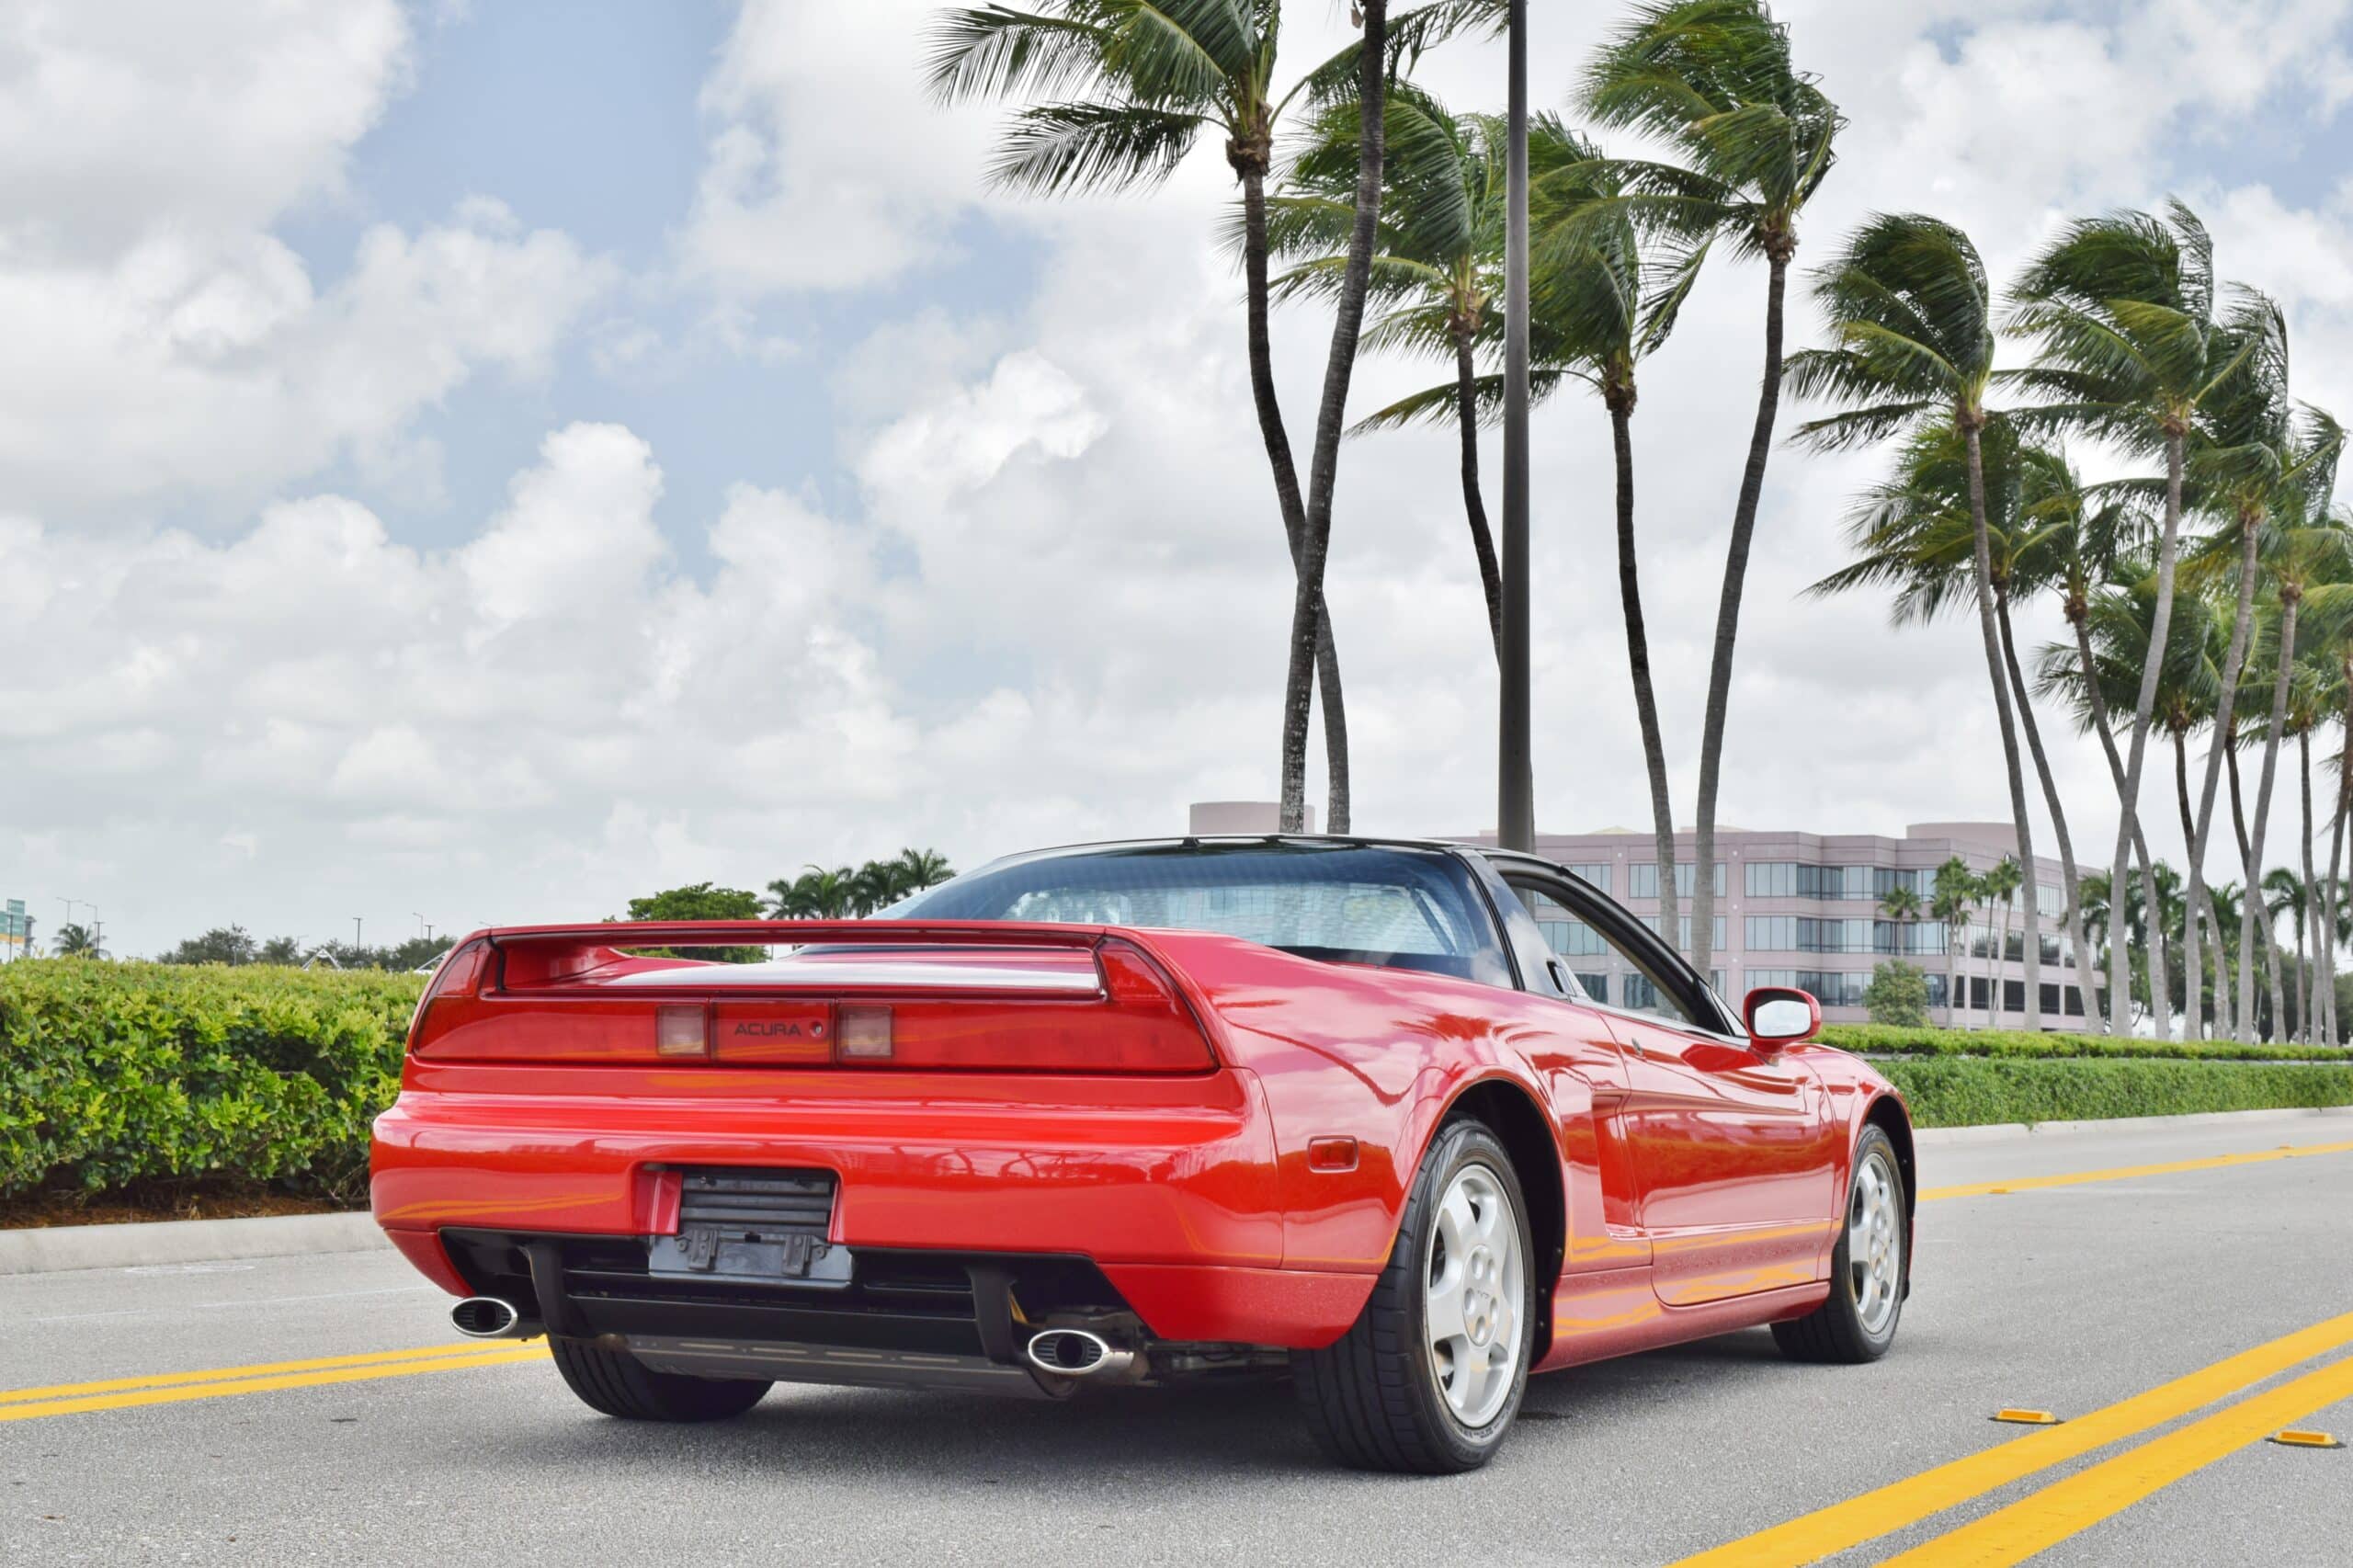 1991 Acura NSX 2 Owner-Florida Car -ONLY 20K Miles! – All original – Unmodified- Collector item